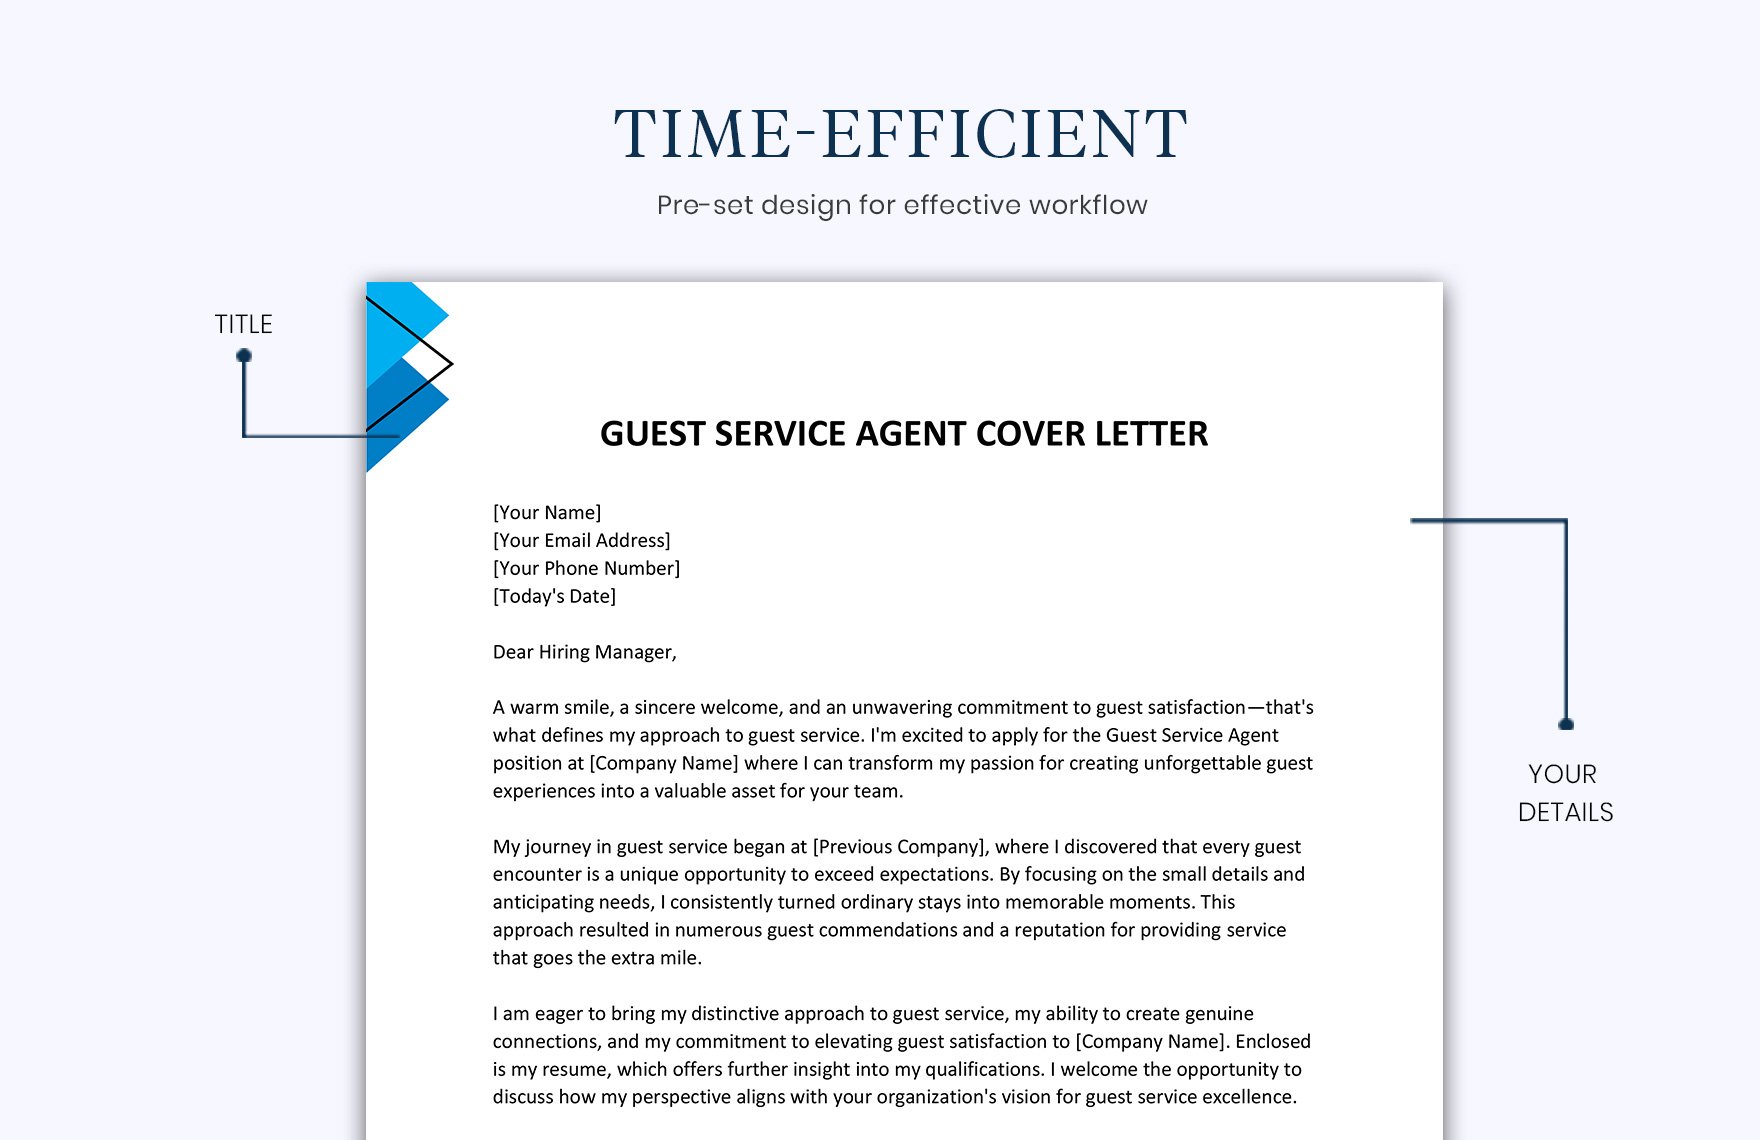 Guest Service Agent Cover Letter